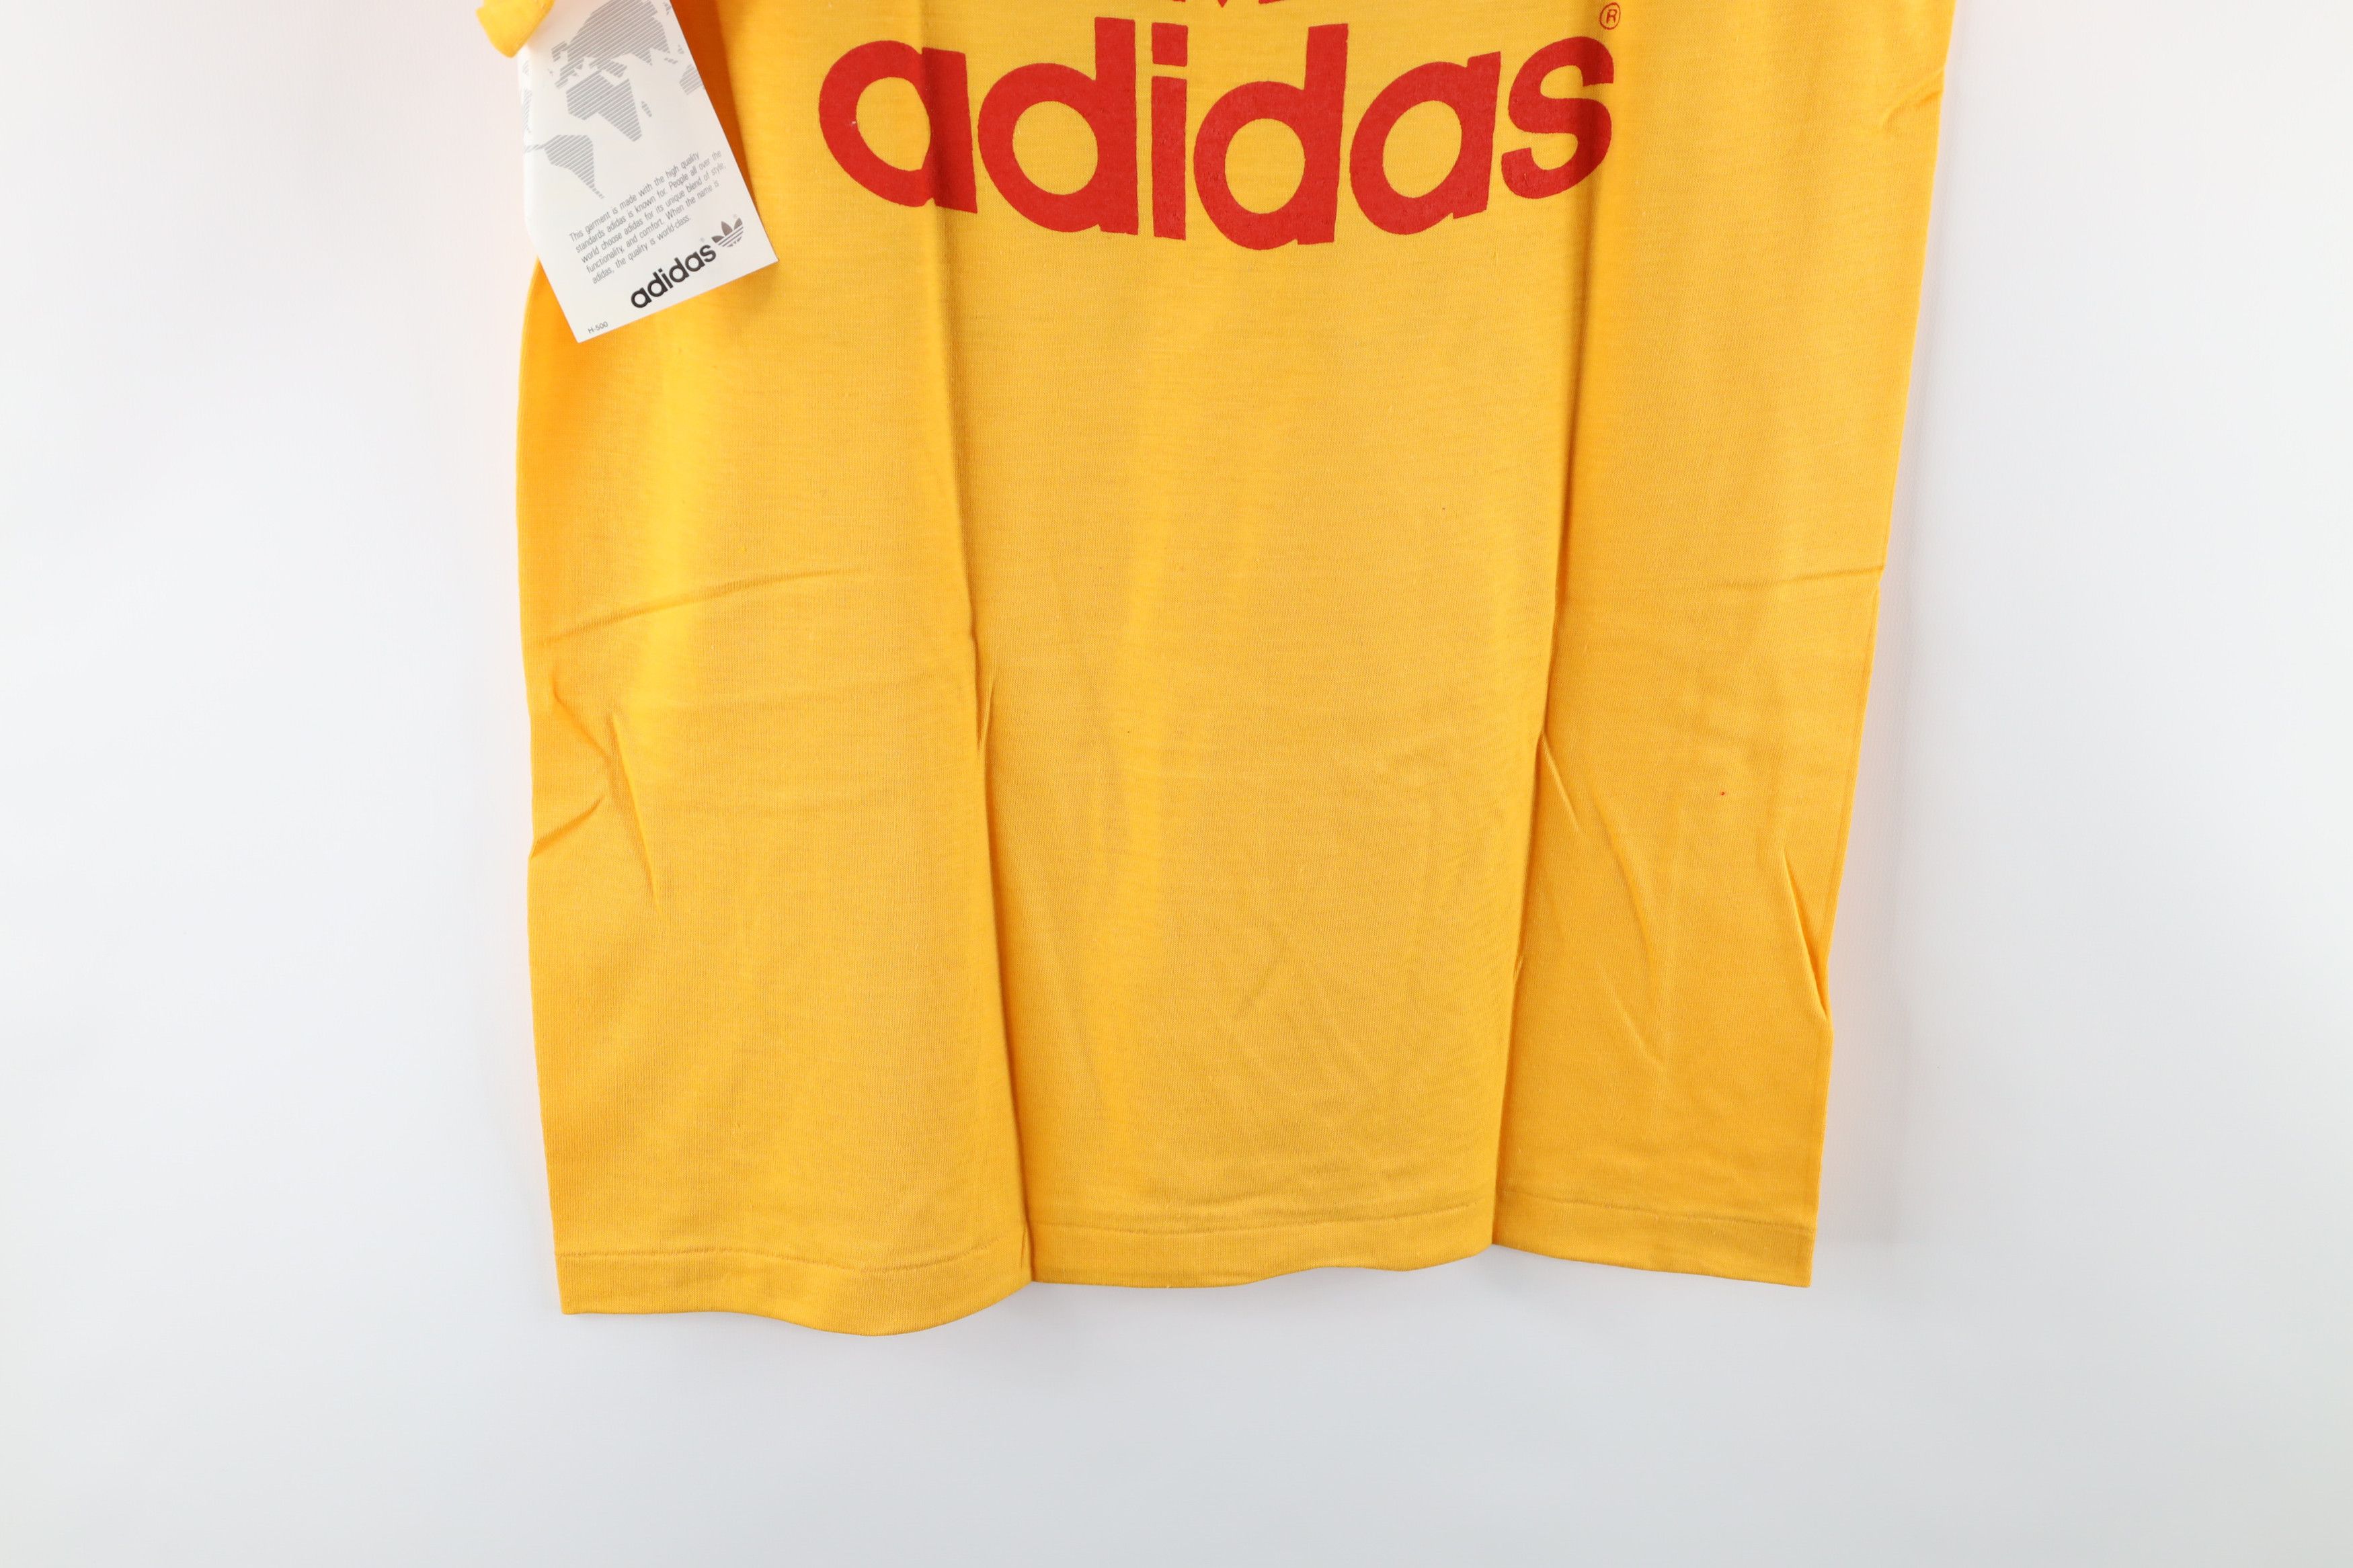 Adidas NOS Vintage 80s Adidas Trefoil 1988 Olympics T-Shirt Yellow Size US S / EU 44-46 / 1 - 9 Preview